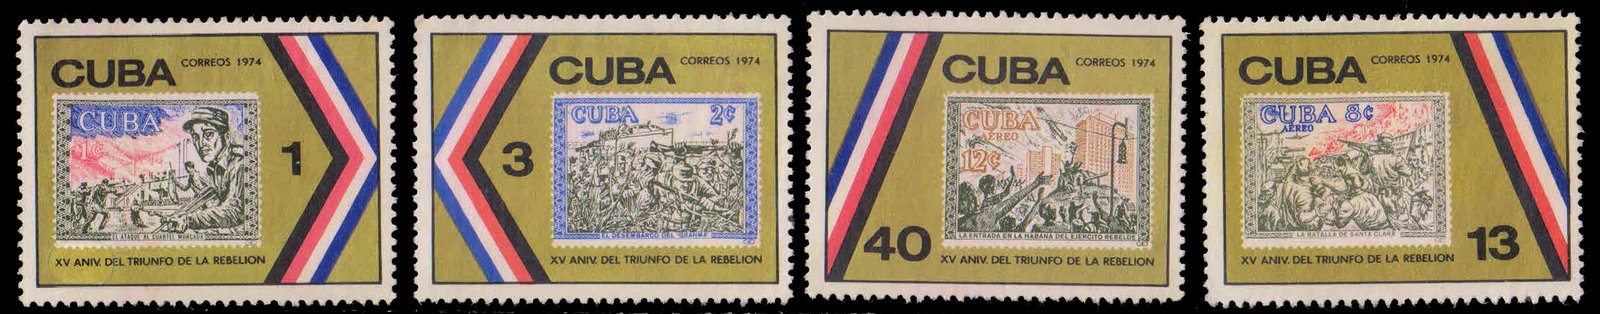 CUBA 1974-Revolution Stamps of 1960-Stamp on Stamp-Set of 4, Mint G/W, S.G. 2086-2089-Cat � 6-